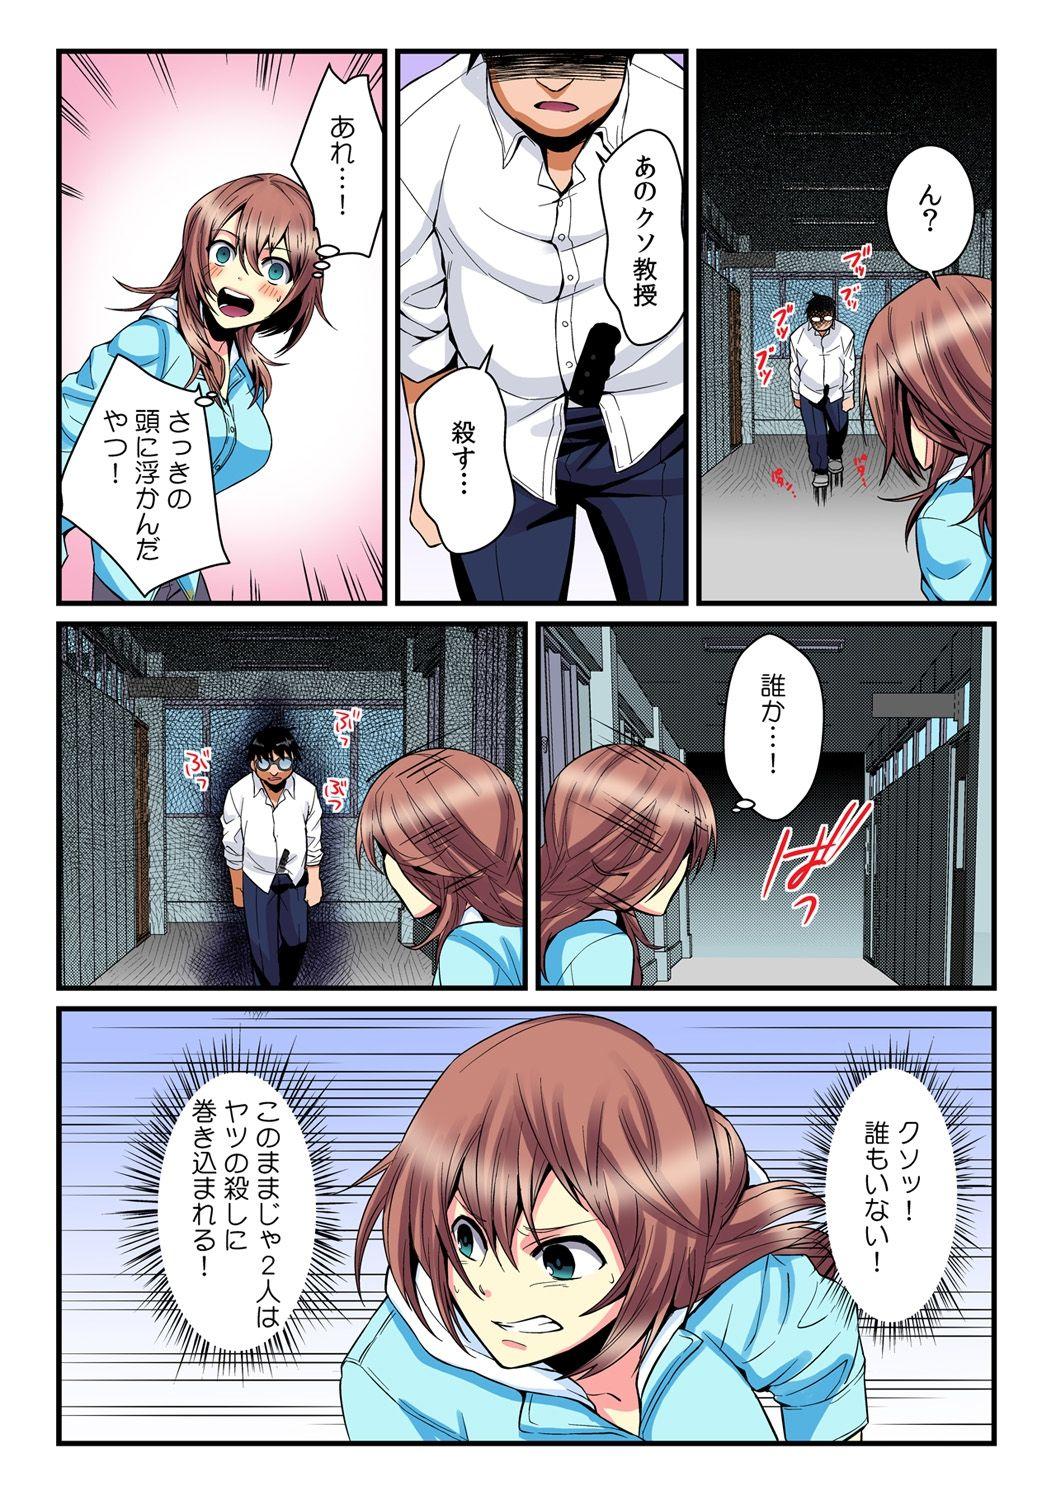 [Akagi Gijou / Akahige] I became a girl- and I definitely can't let anyone find out! (Full color) 2 19